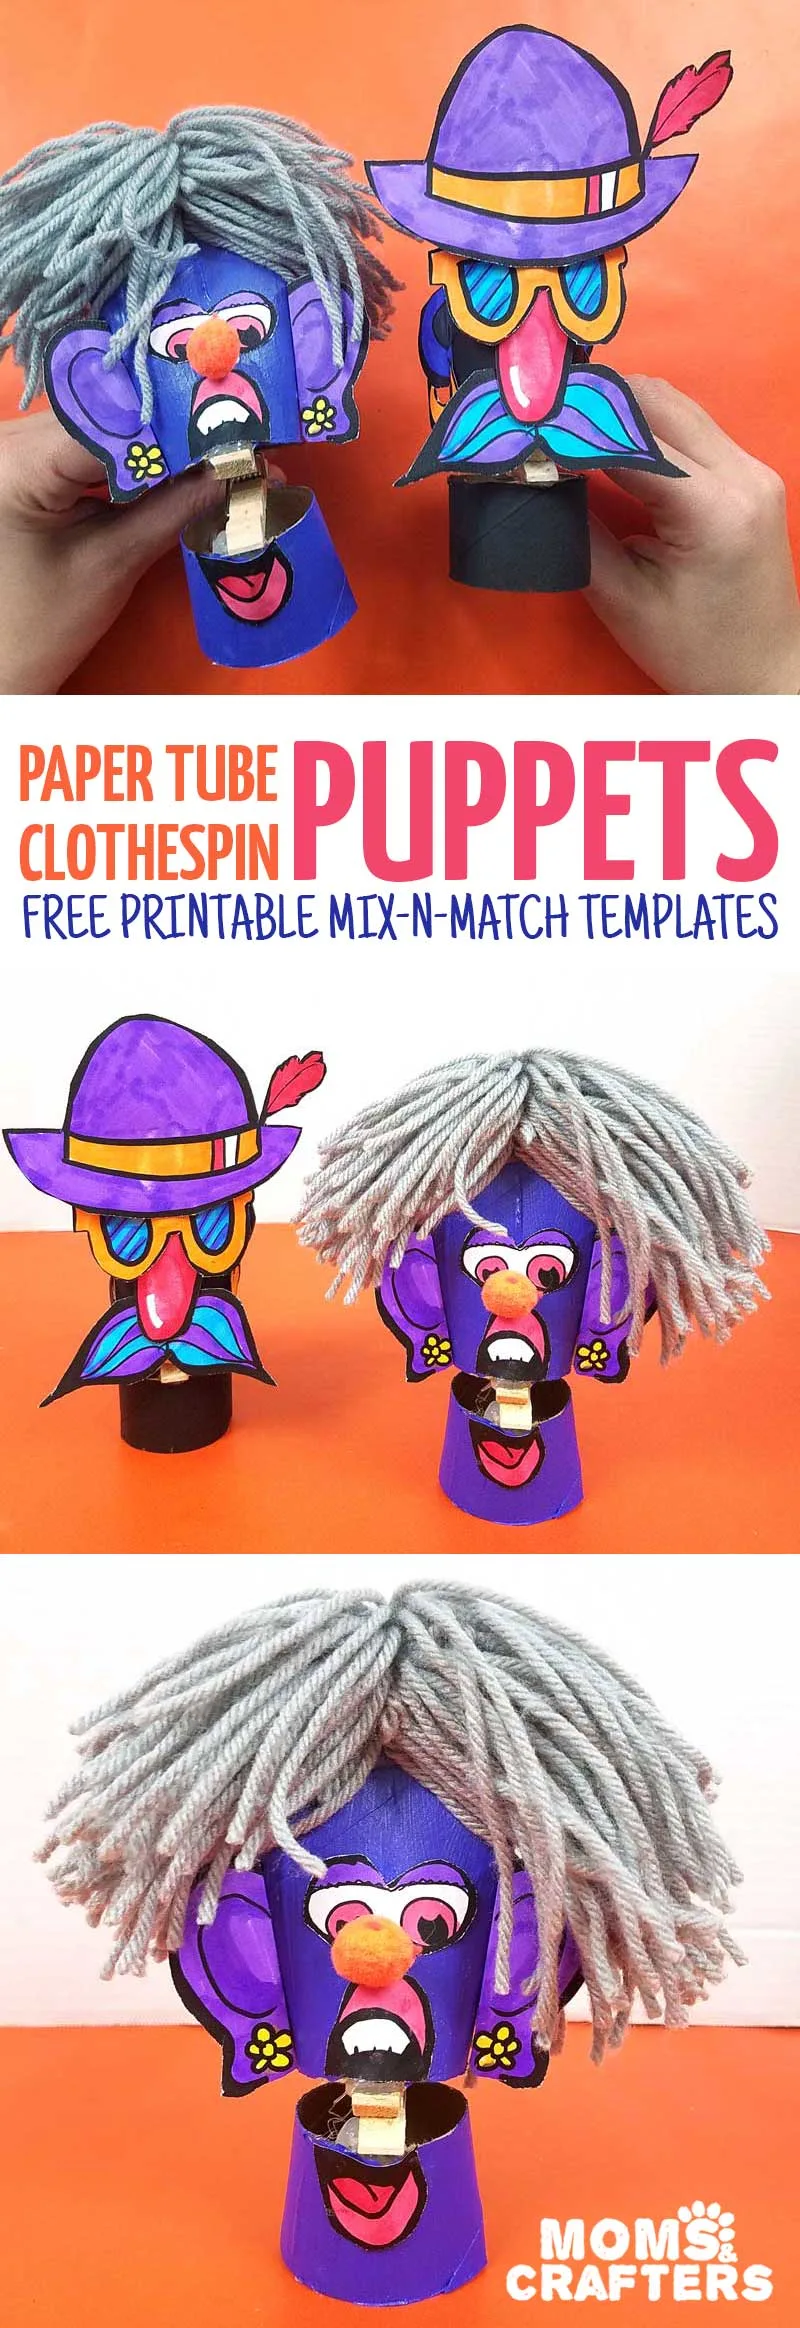 Make these adorable toilet paper roll clothespin puppets using the free paper craft template! It includes loads of mix and match facial featues and accessories and is a fun recycled paper tube arts and crafts project for kids, tweens, teens, and adults. 